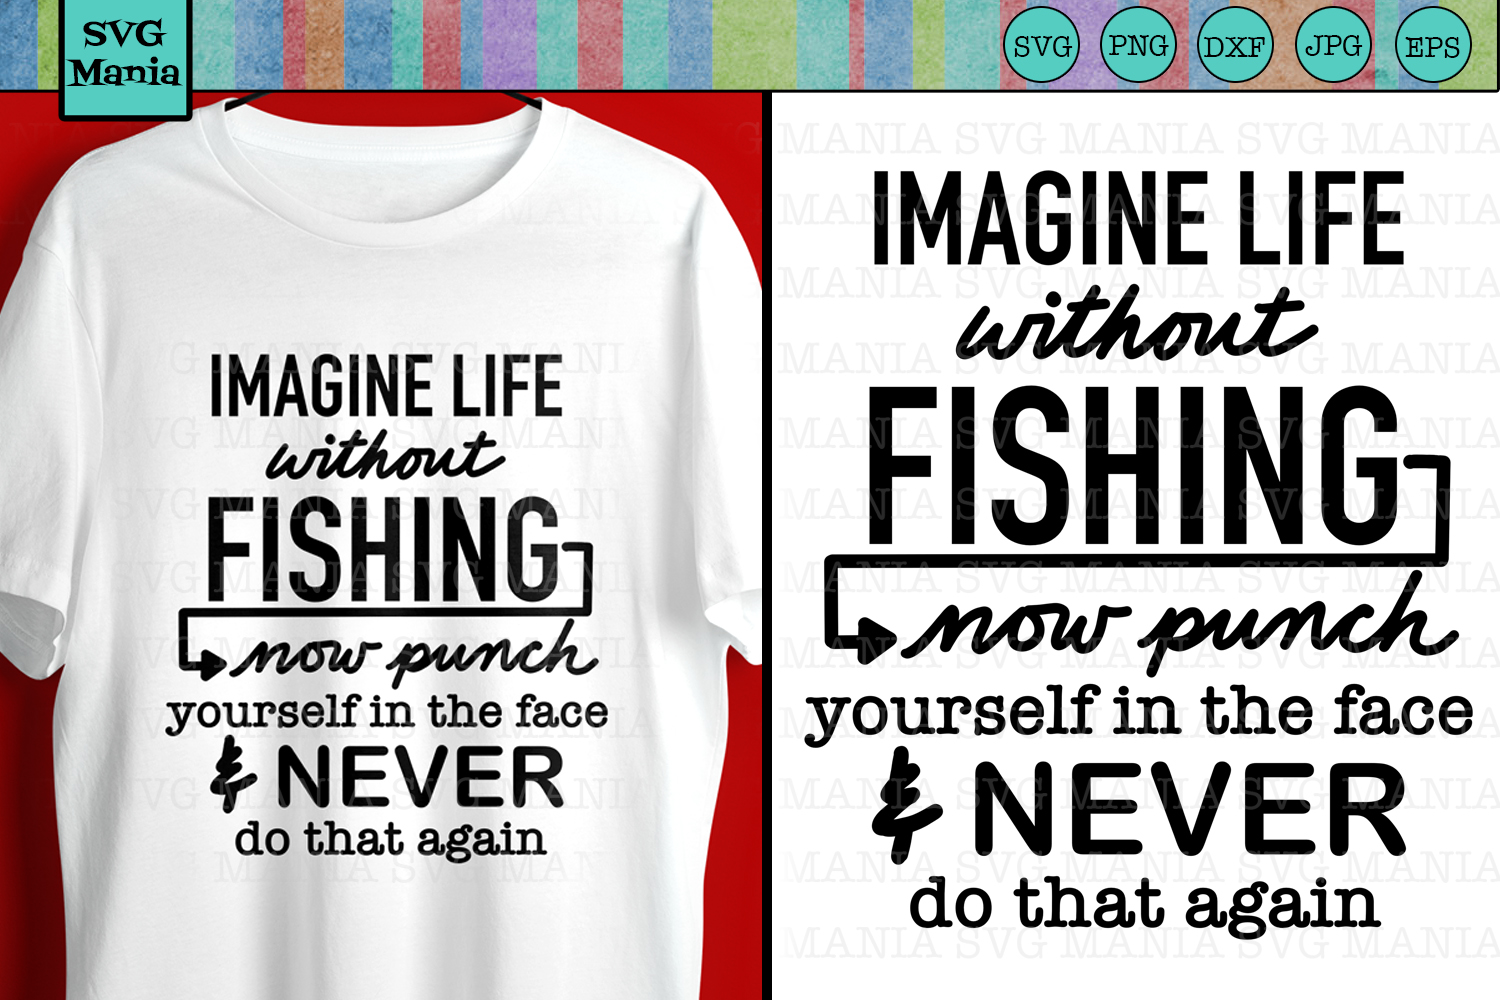 Funny Fishing Quote SVG File, Fishing Shirt SVG File, SVG